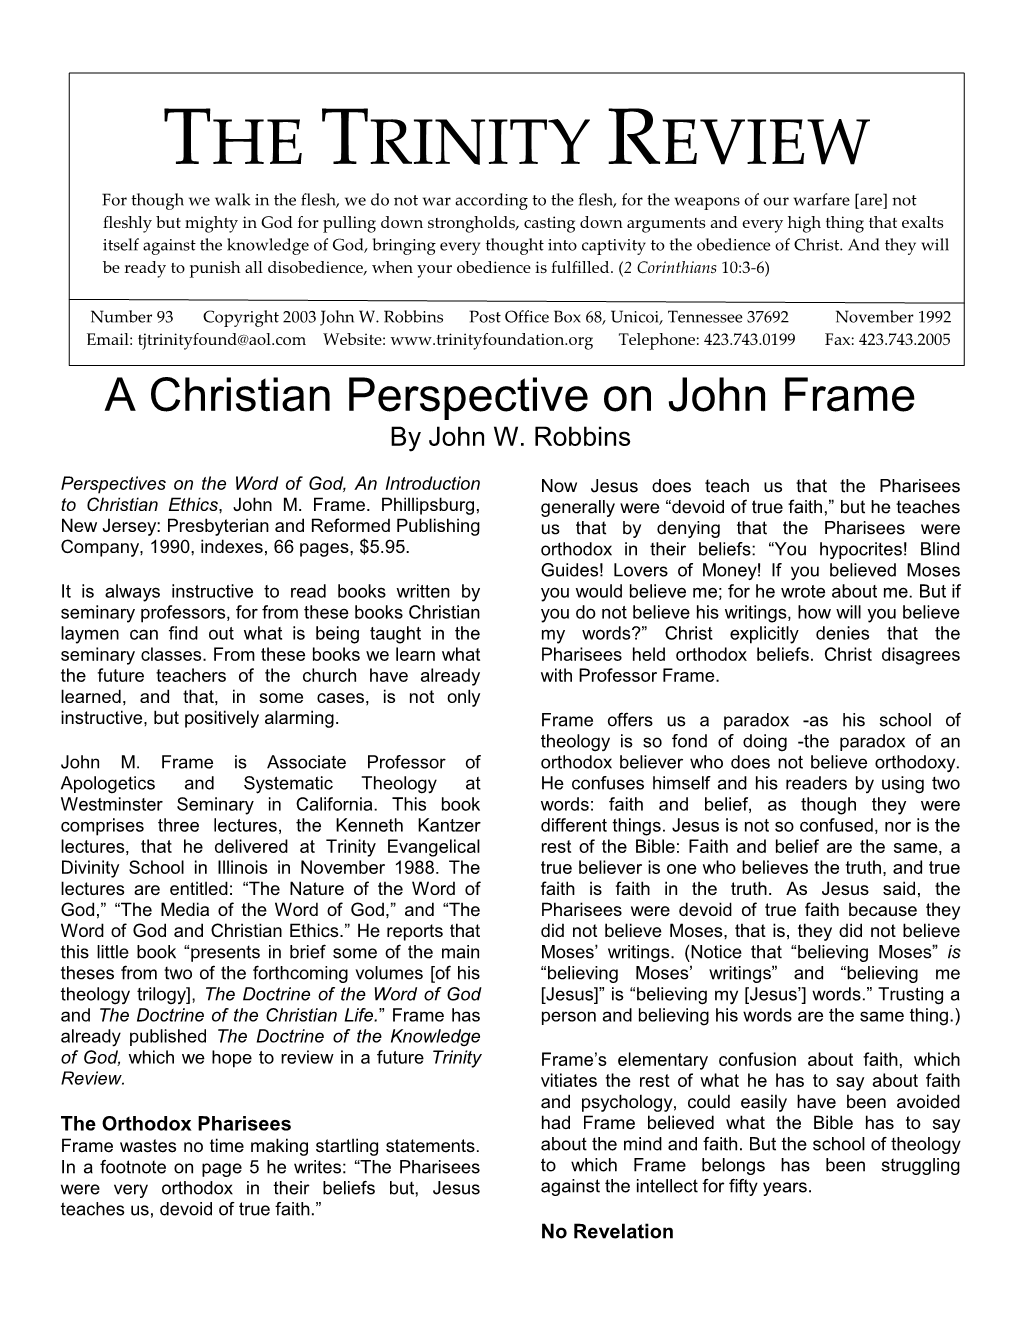 A Christian Perspective on John Frame by John W